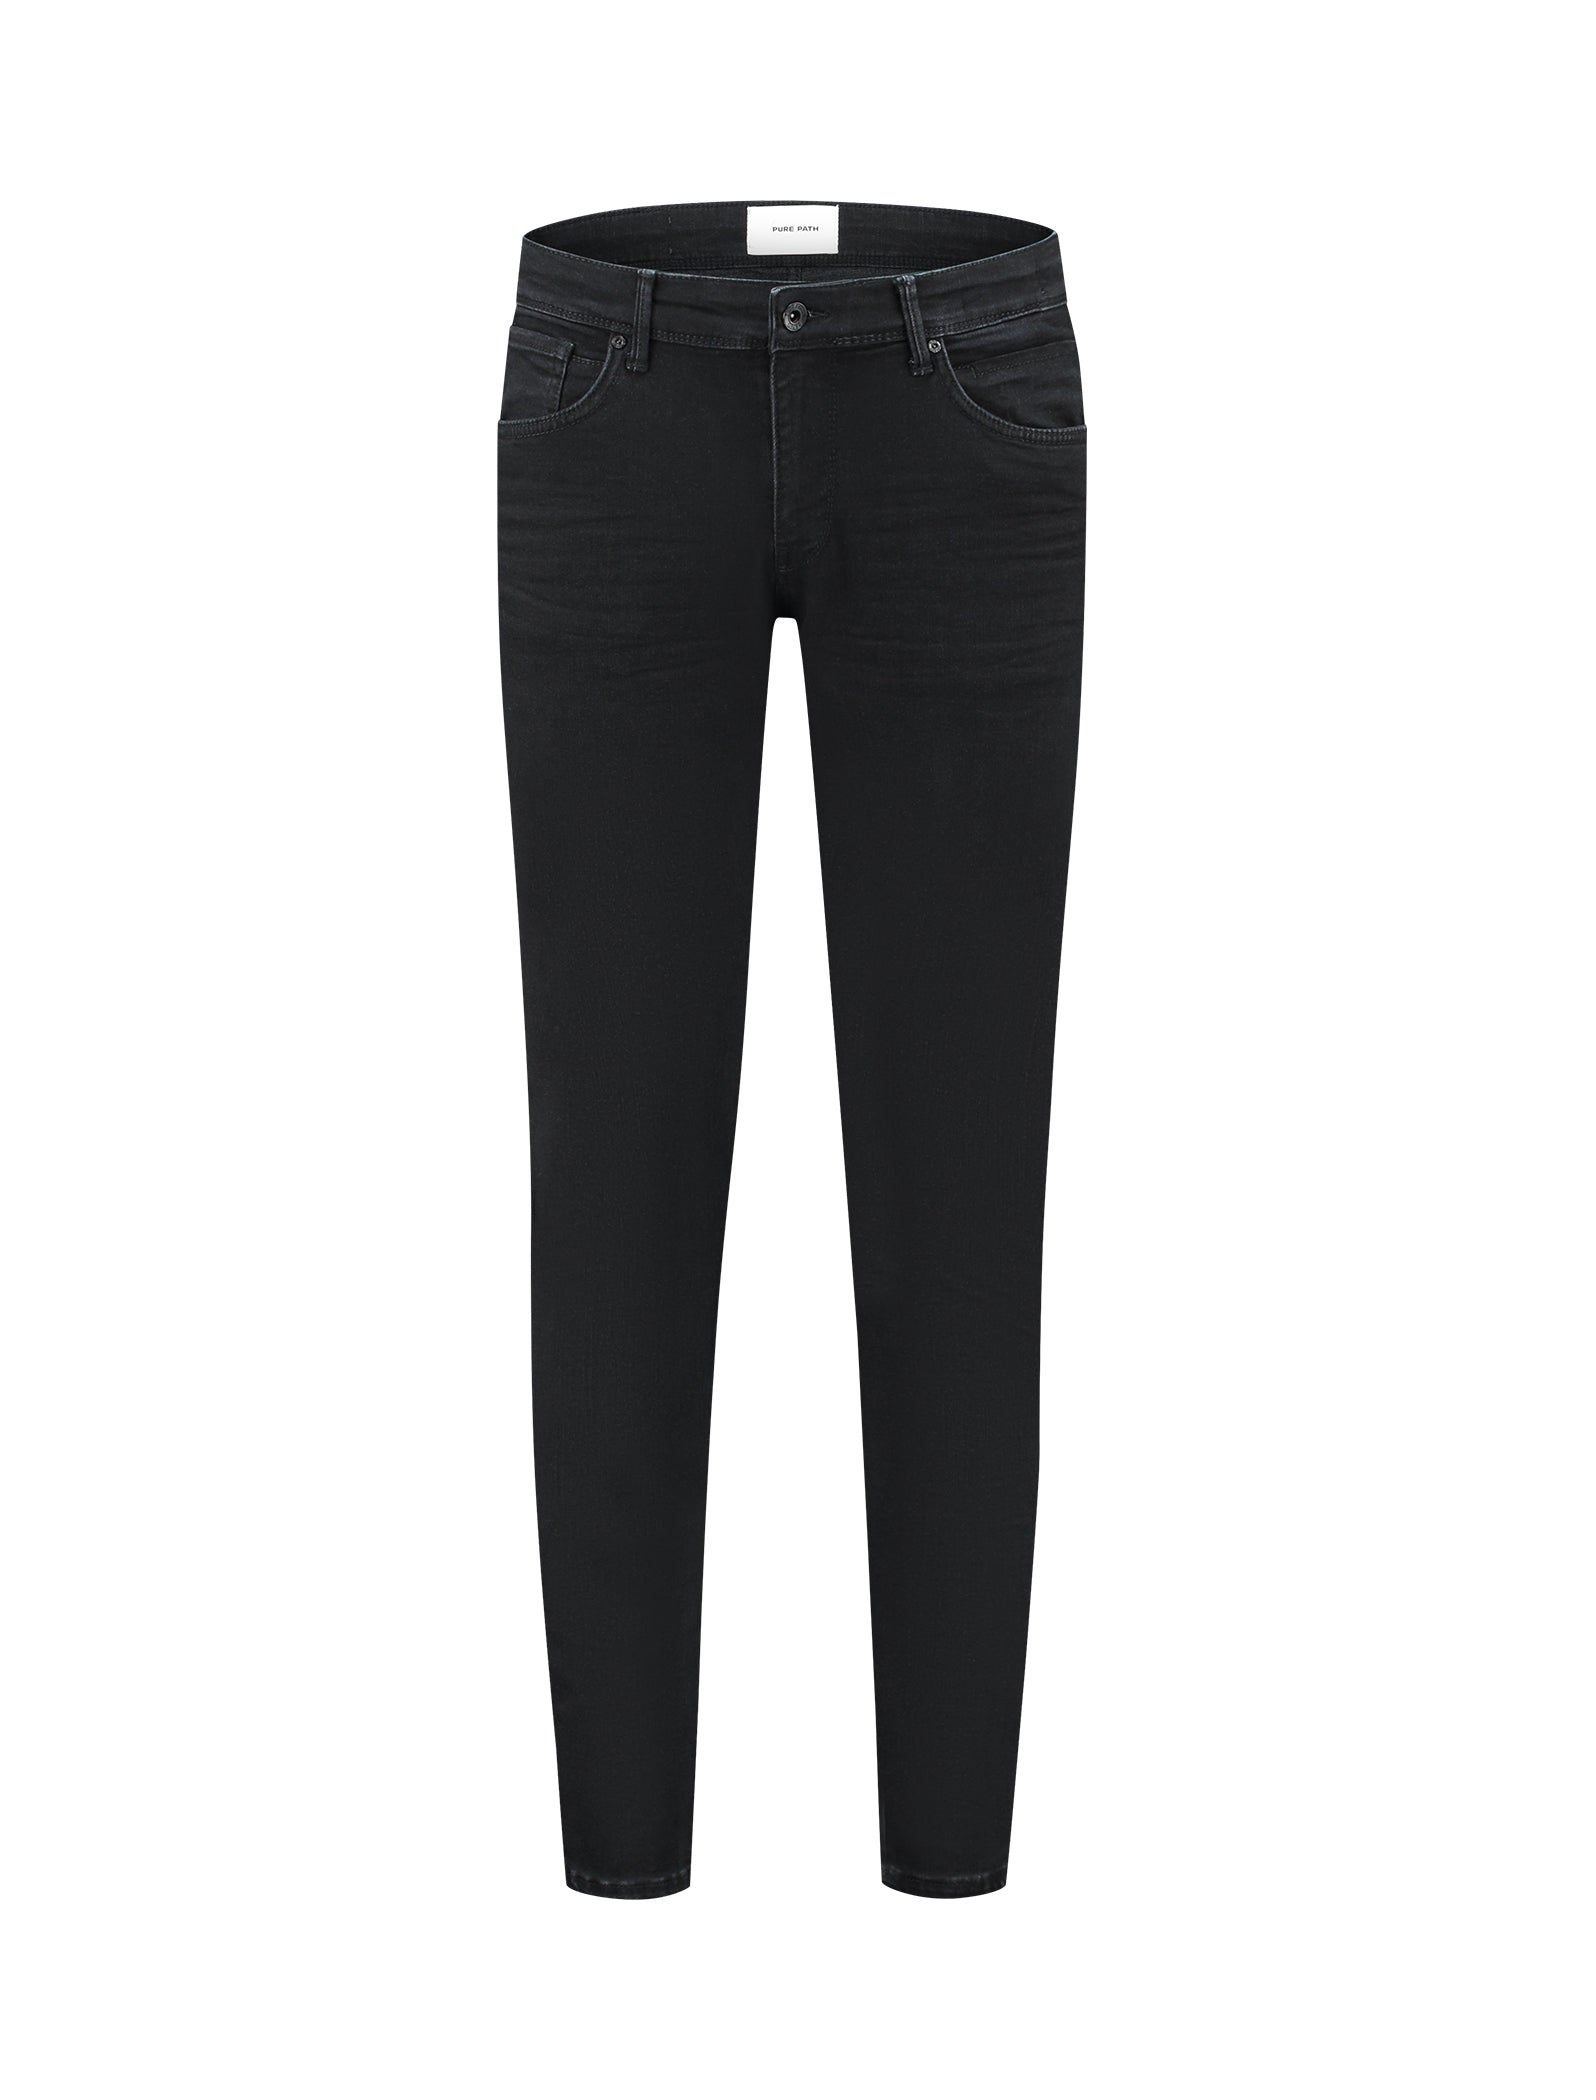 Men's Jeans & Trousers – OLIAMI